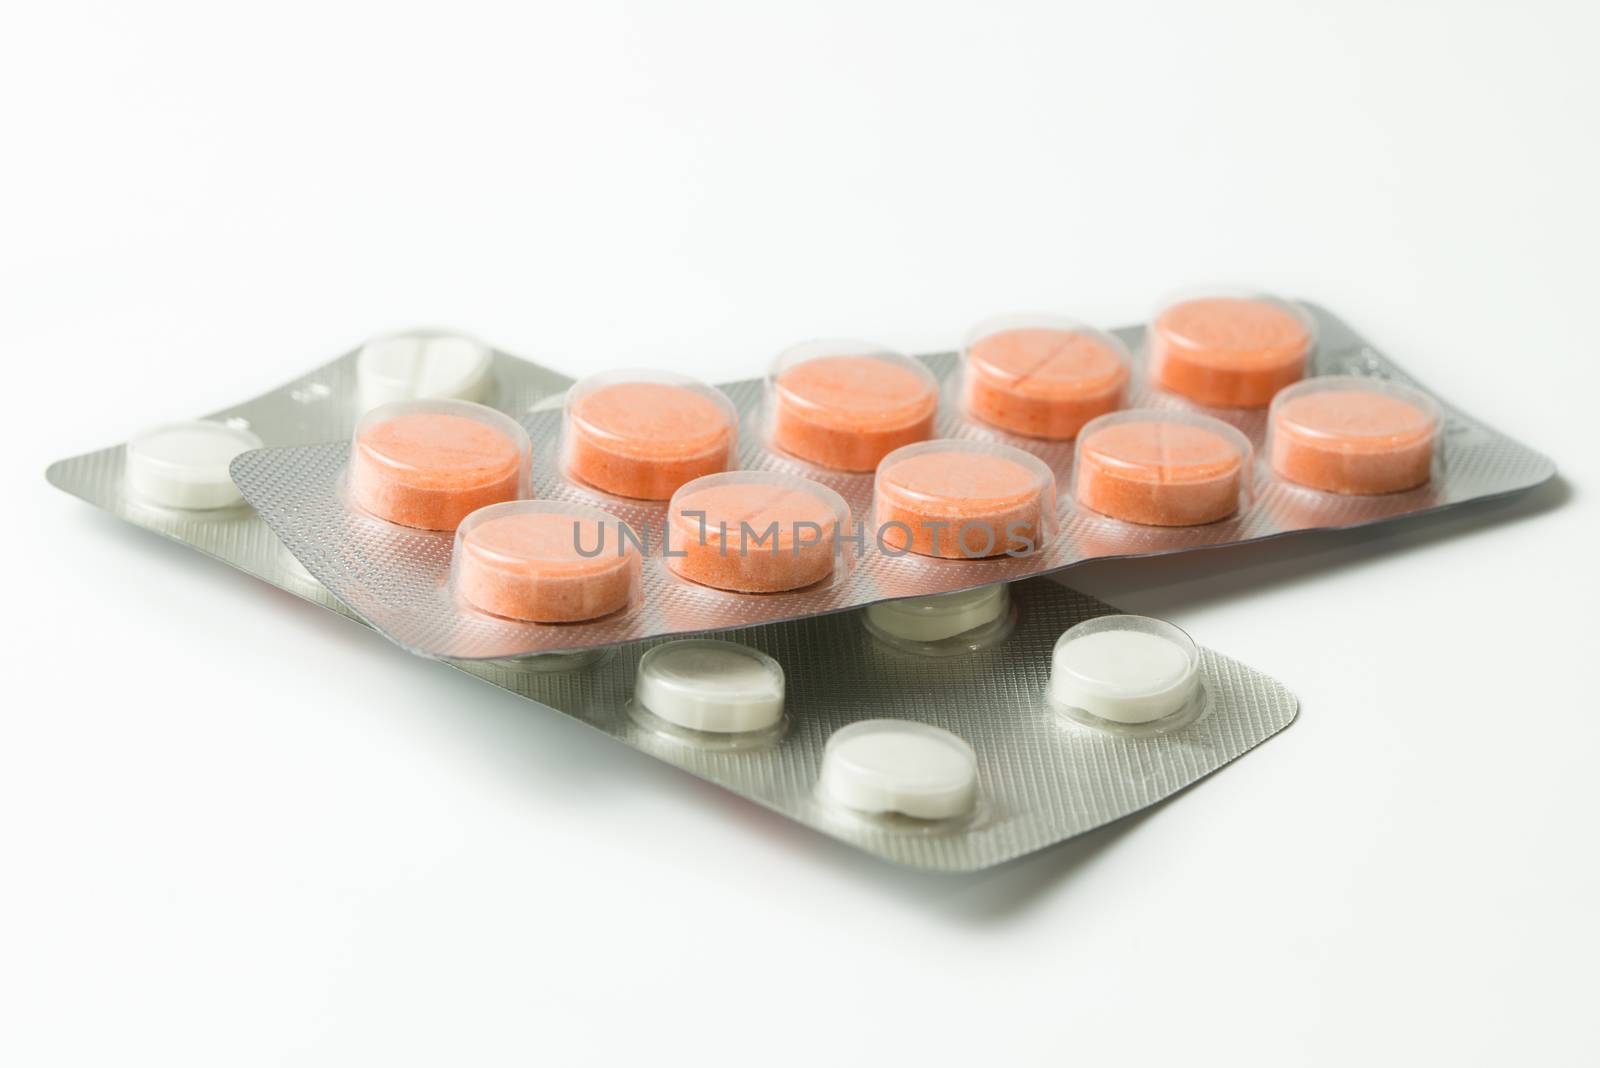 Set of pills in a plastic blister package by Kenishirotie